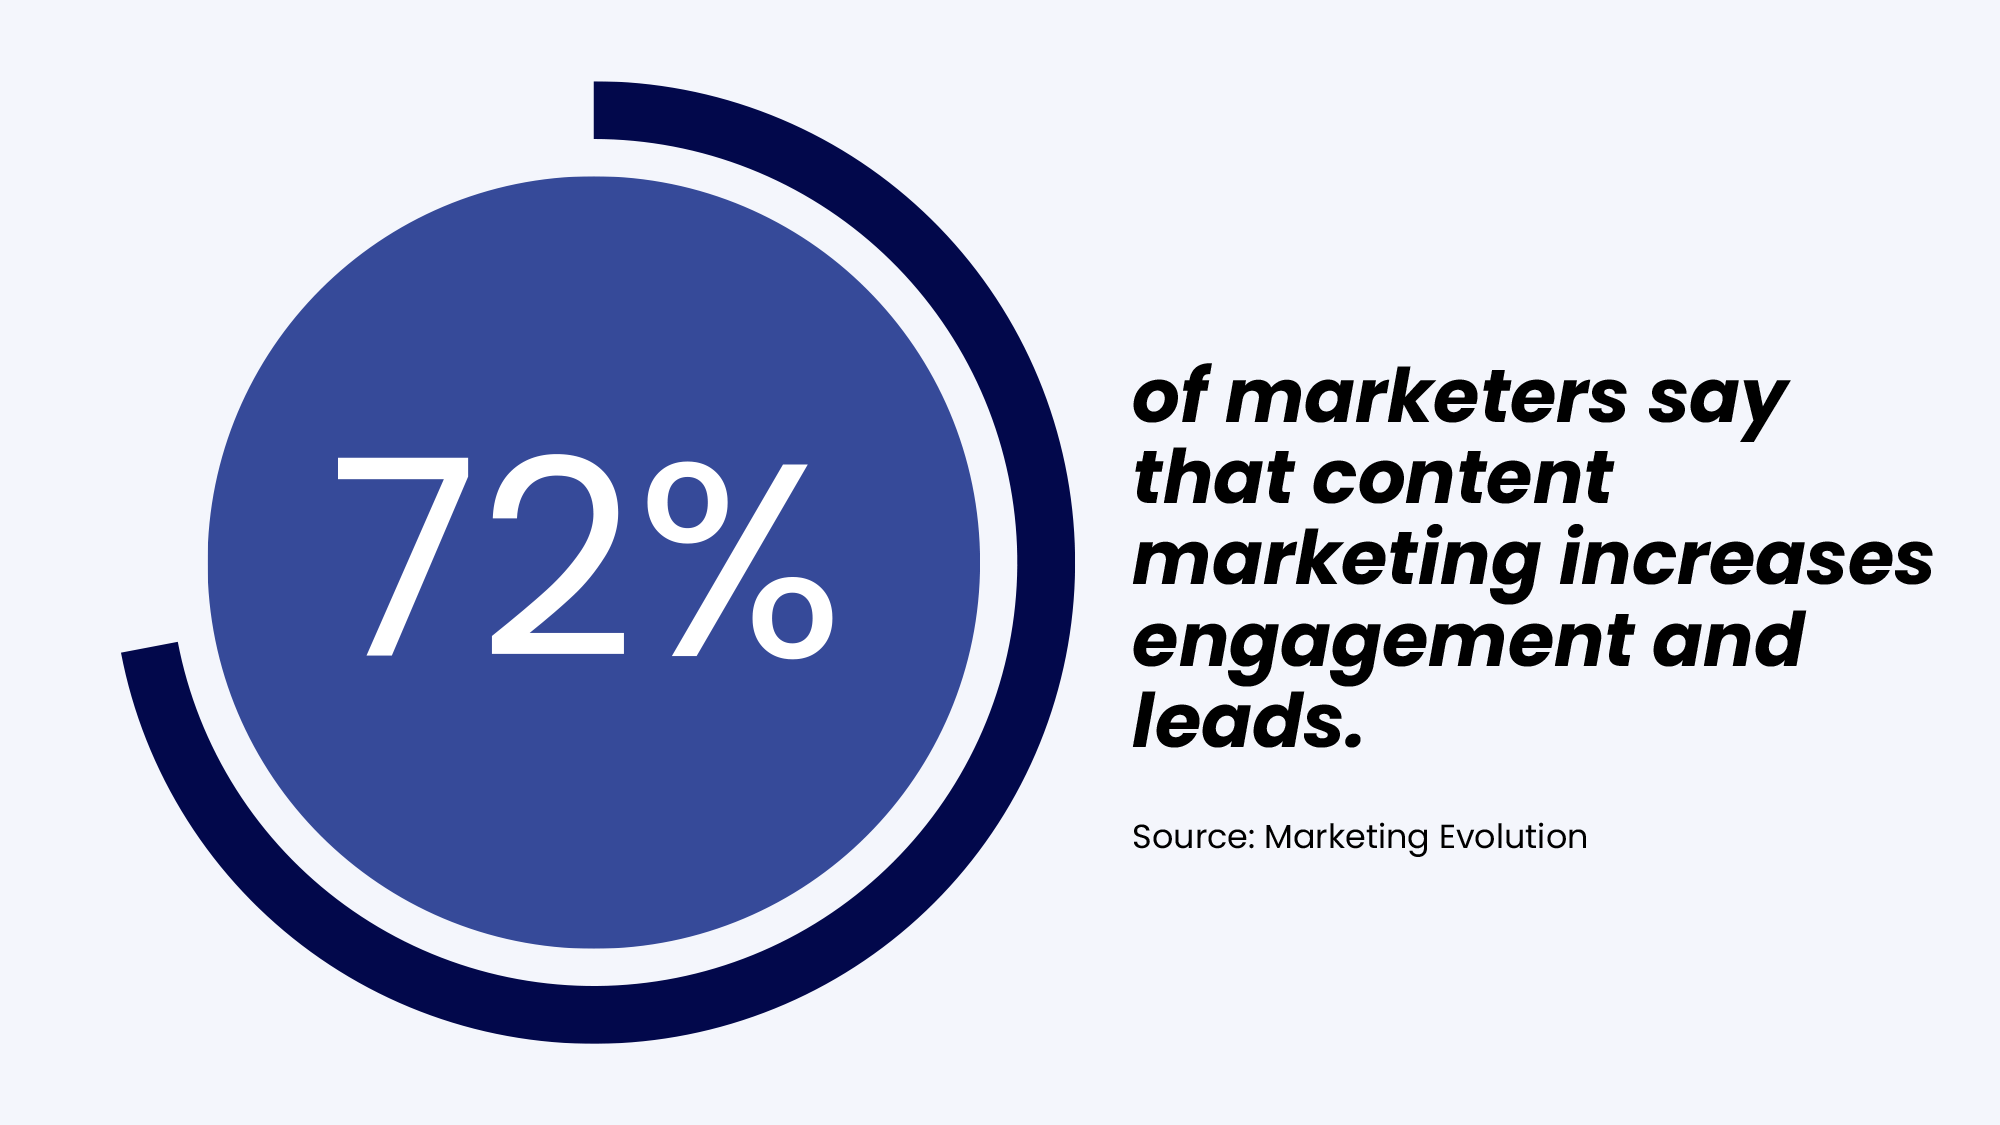 72% of marketers say that content marketing increases engagement and leads